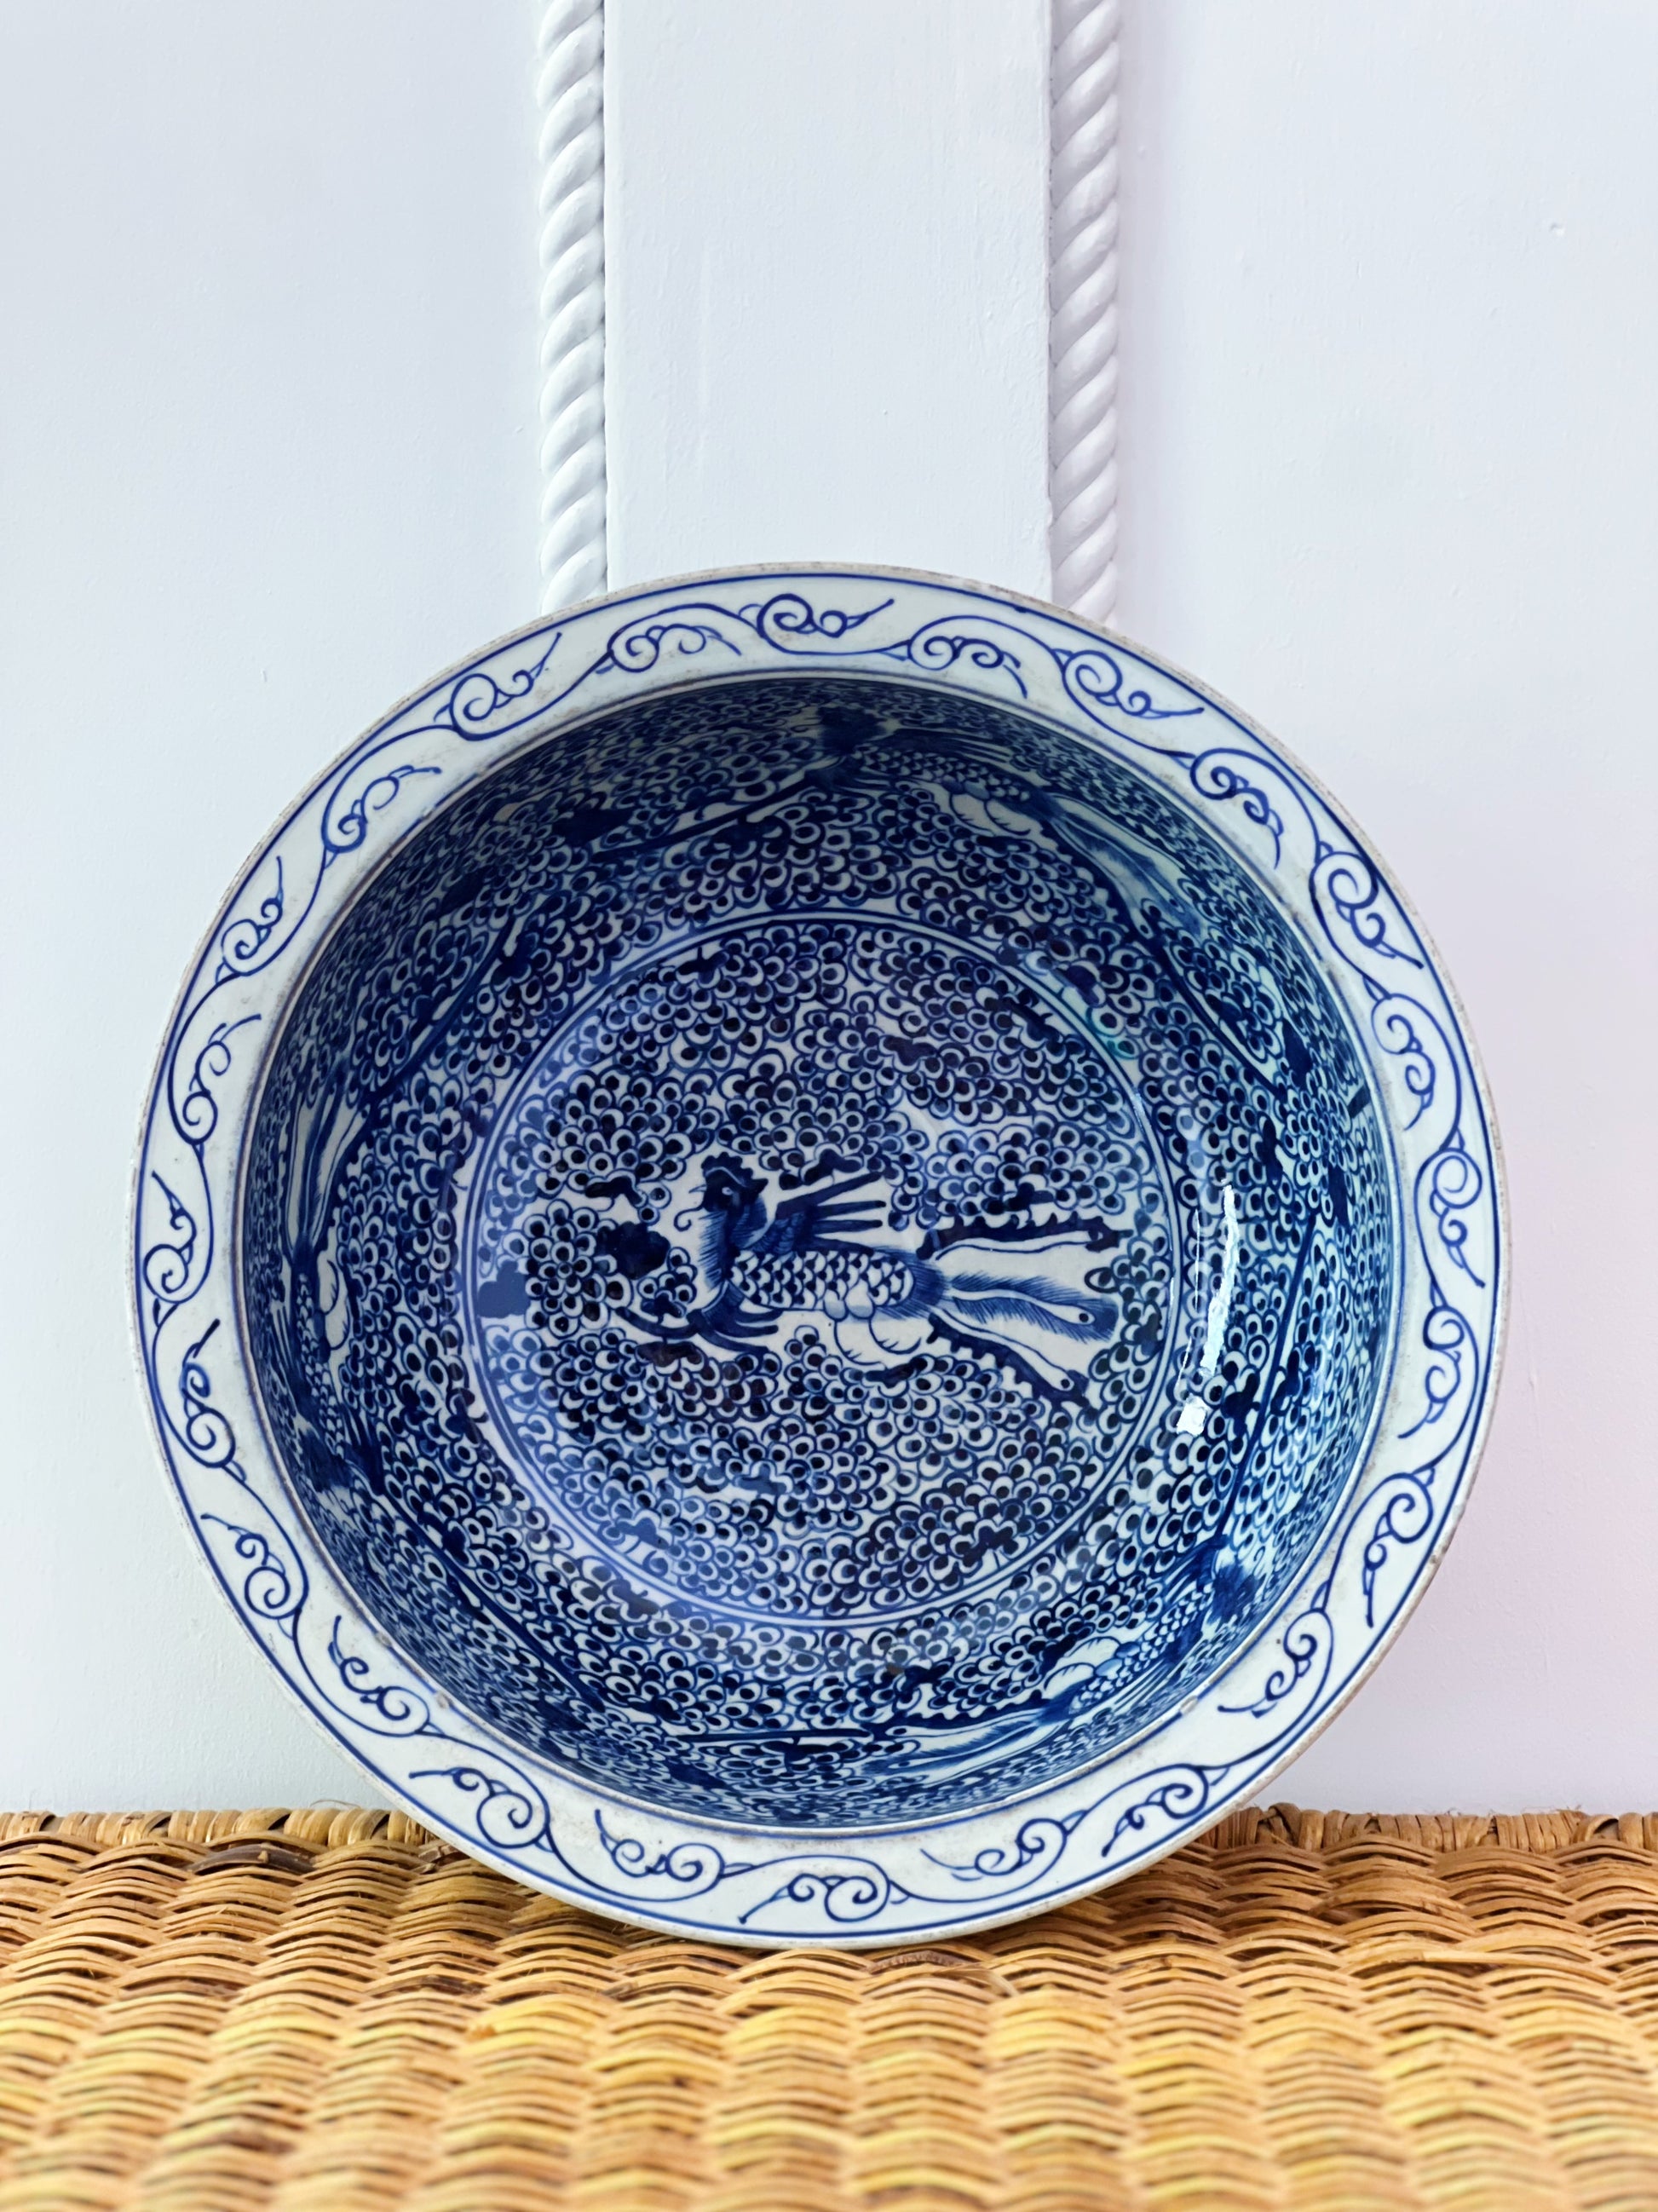 inside view of a blue and white basin bowl on a wicker shelf